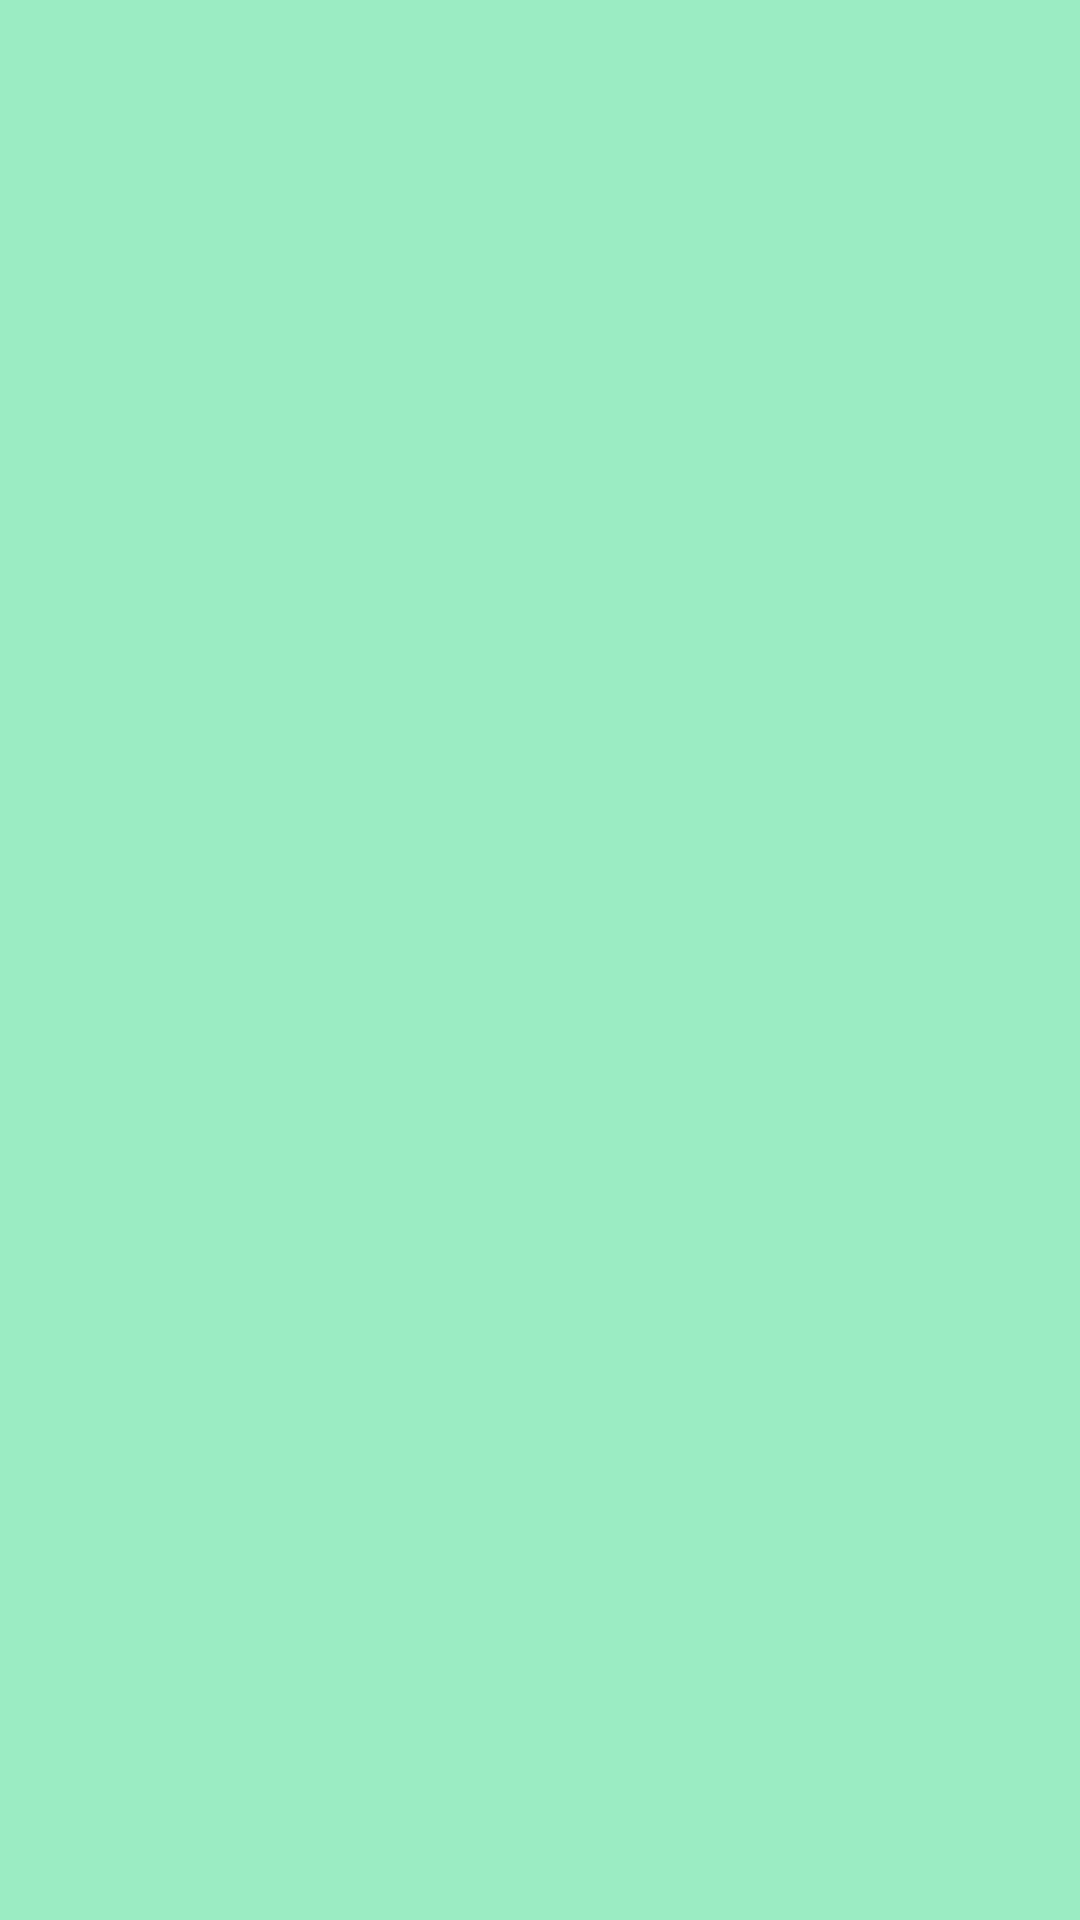 Mint Green Phone 11 Wallpaper with high-resolution 1080x1920 pixel. Download all Mobile Wallpapers and Use them as wallpapers for your iPhone, Tablet, iPad, Android and other mobile devices